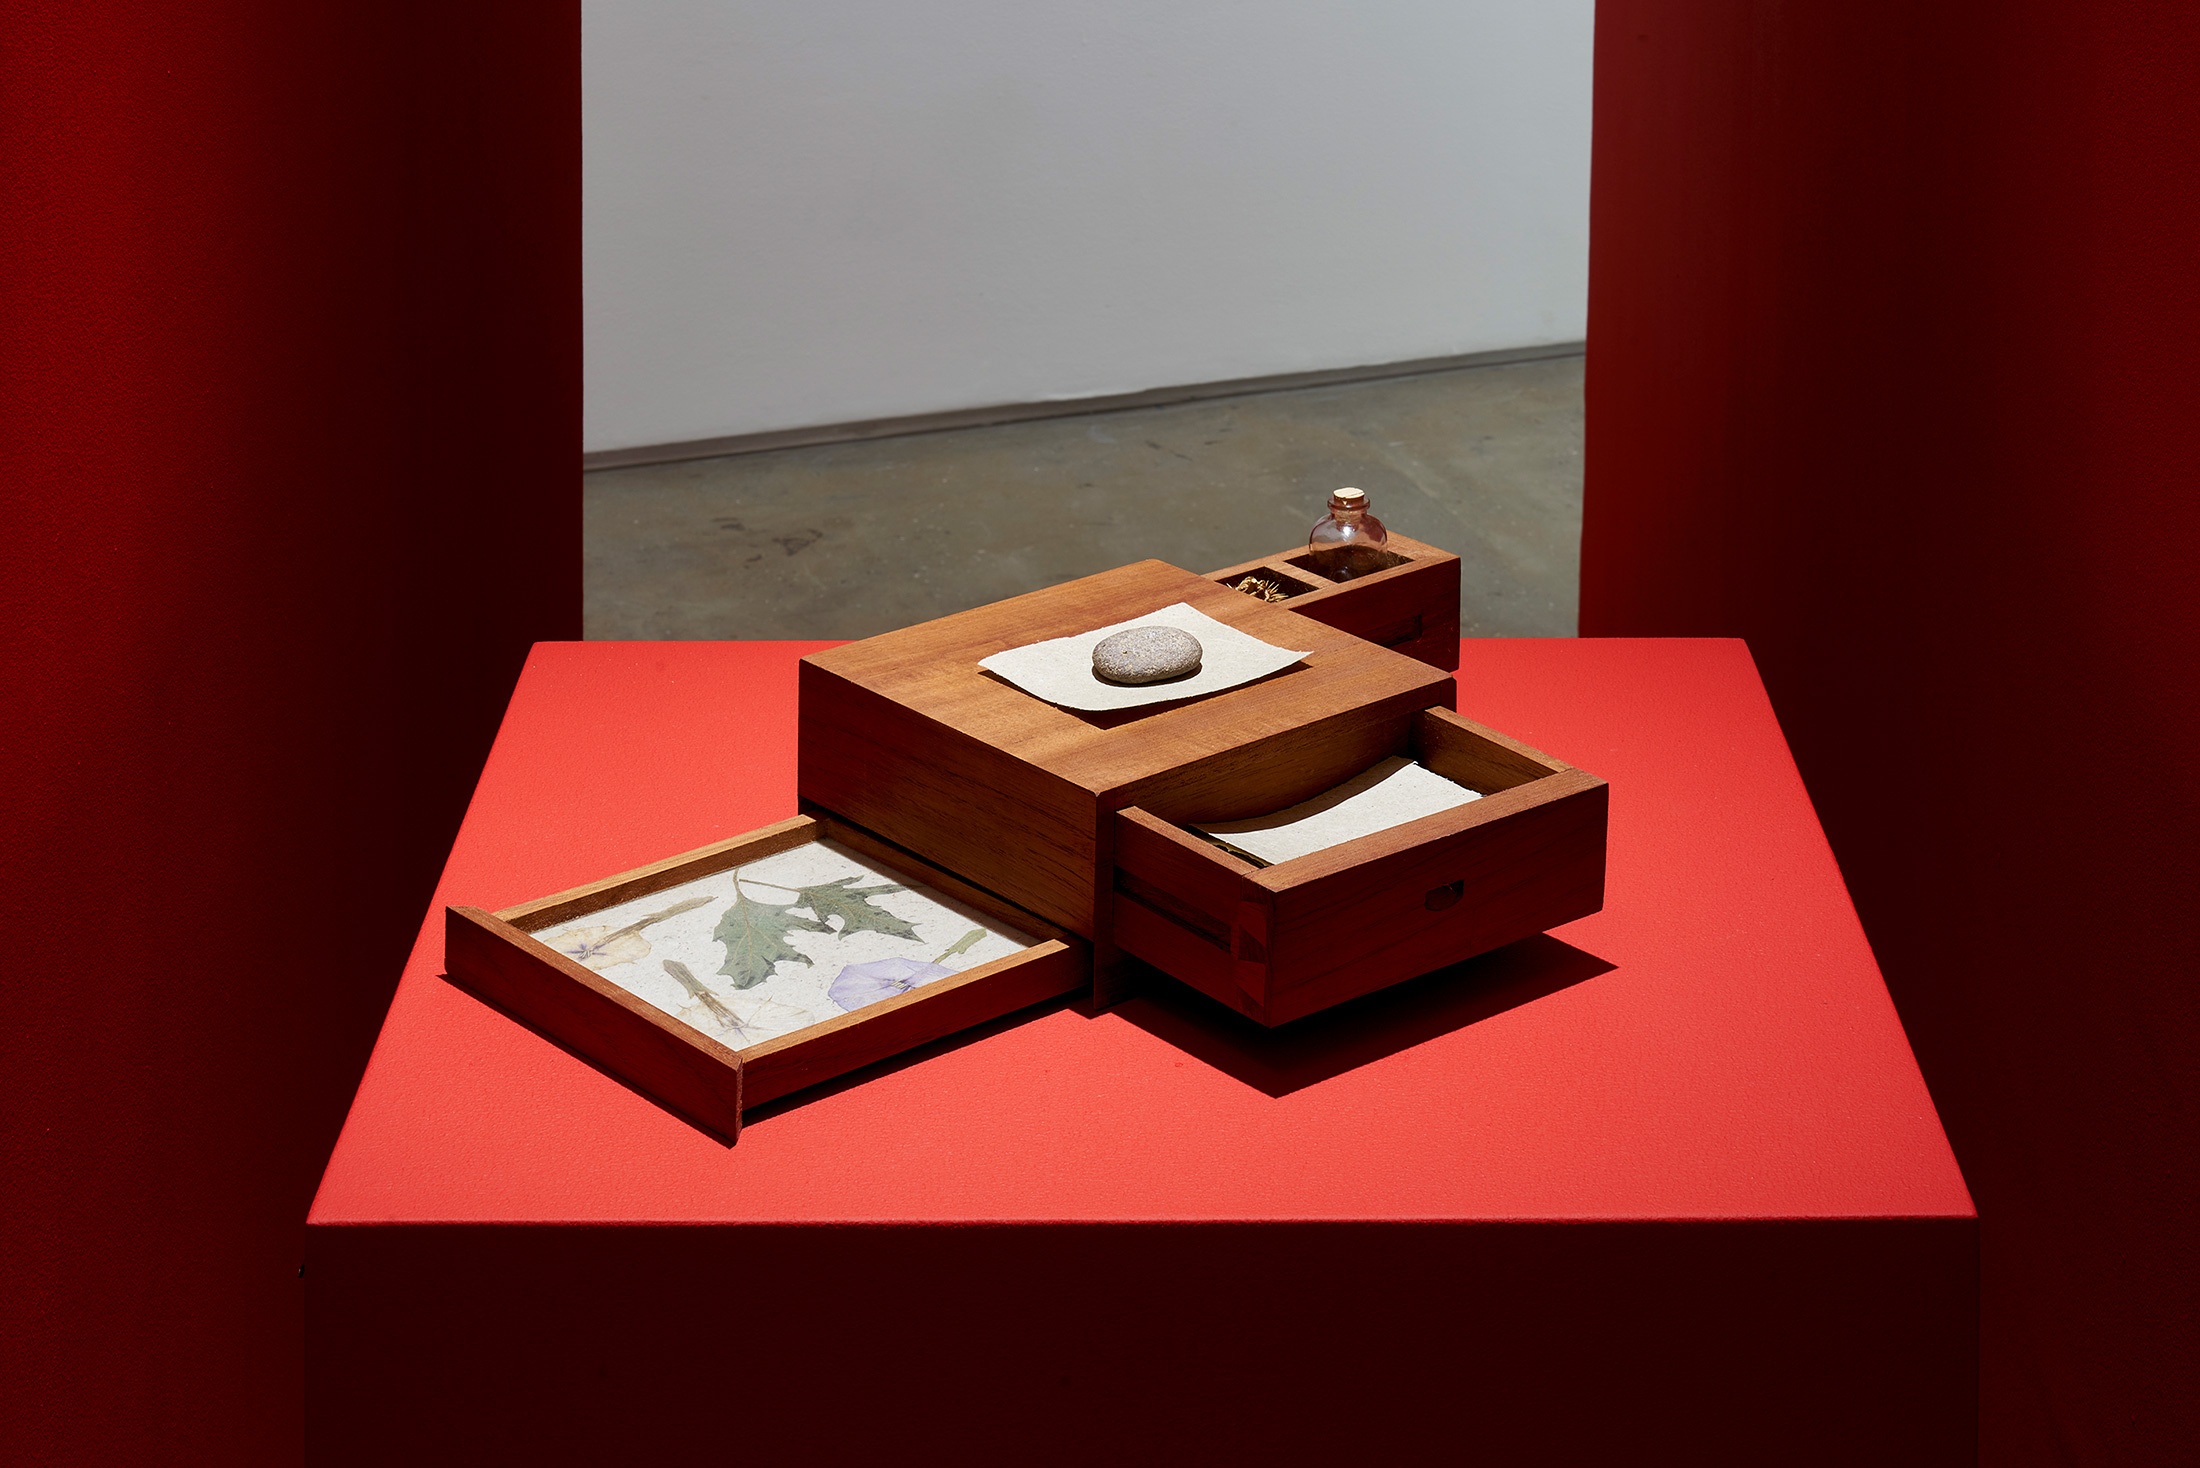 Installation photograph that shows Miguel Cinta Robles’ cedarwood box installation ‘Writing device to craft love letters’ sitting on a red plinth in between two red moveable gallery walls.
